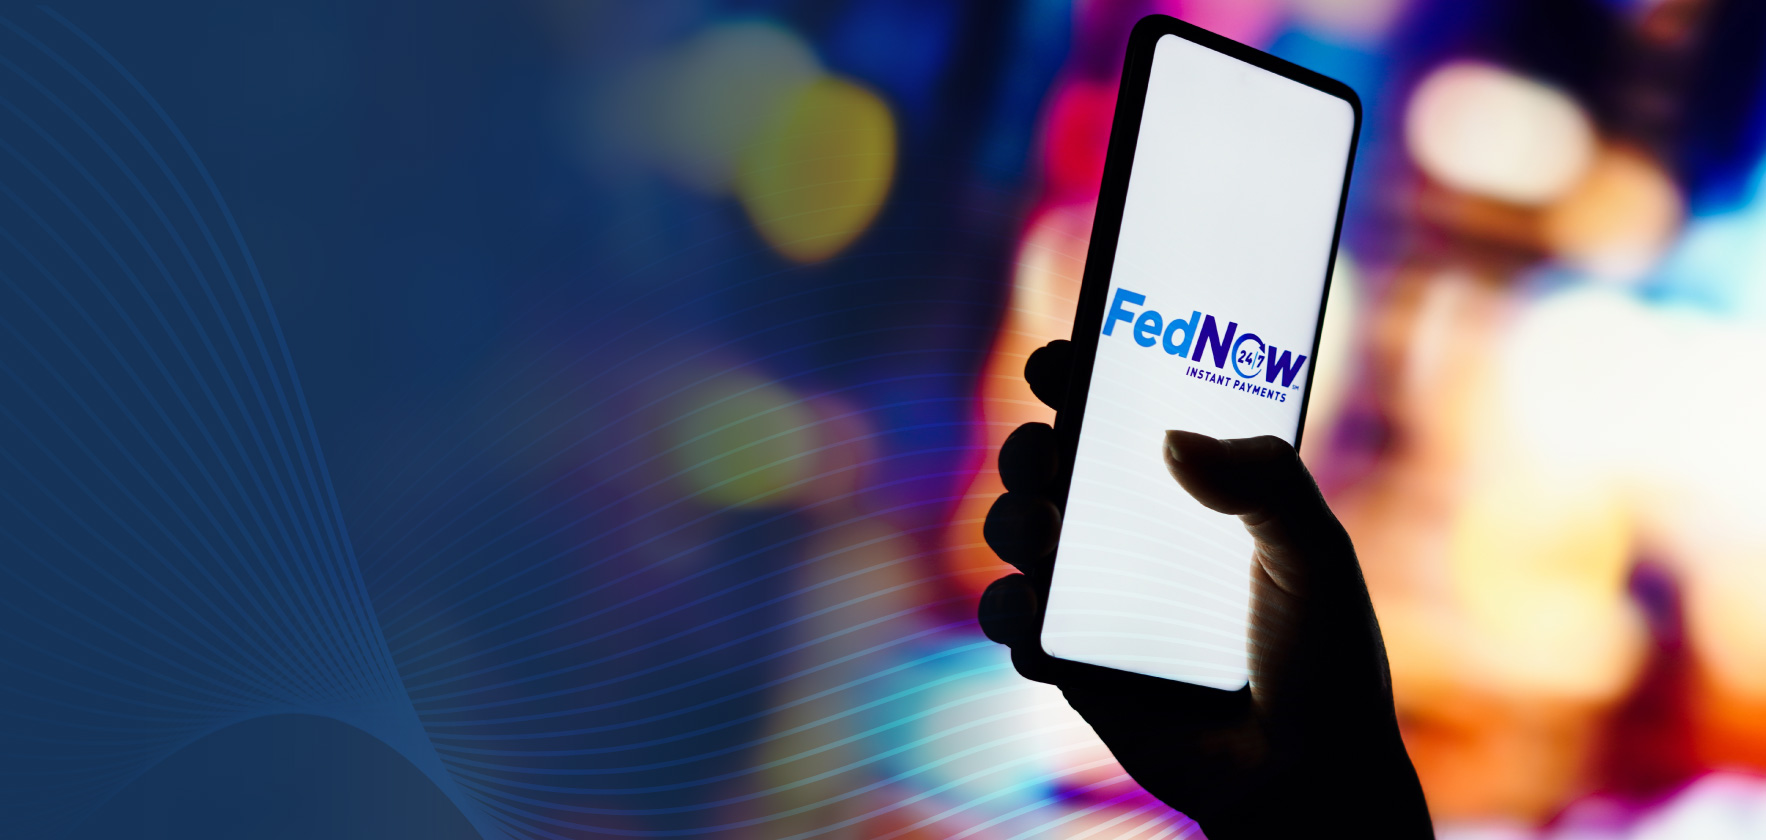 Samaha & Associates Proudly Announces the Publication of the White Paper: “FedNow: The Future of Real-Time Payments—Why Credit Unions Can’t be Fast Followers.”